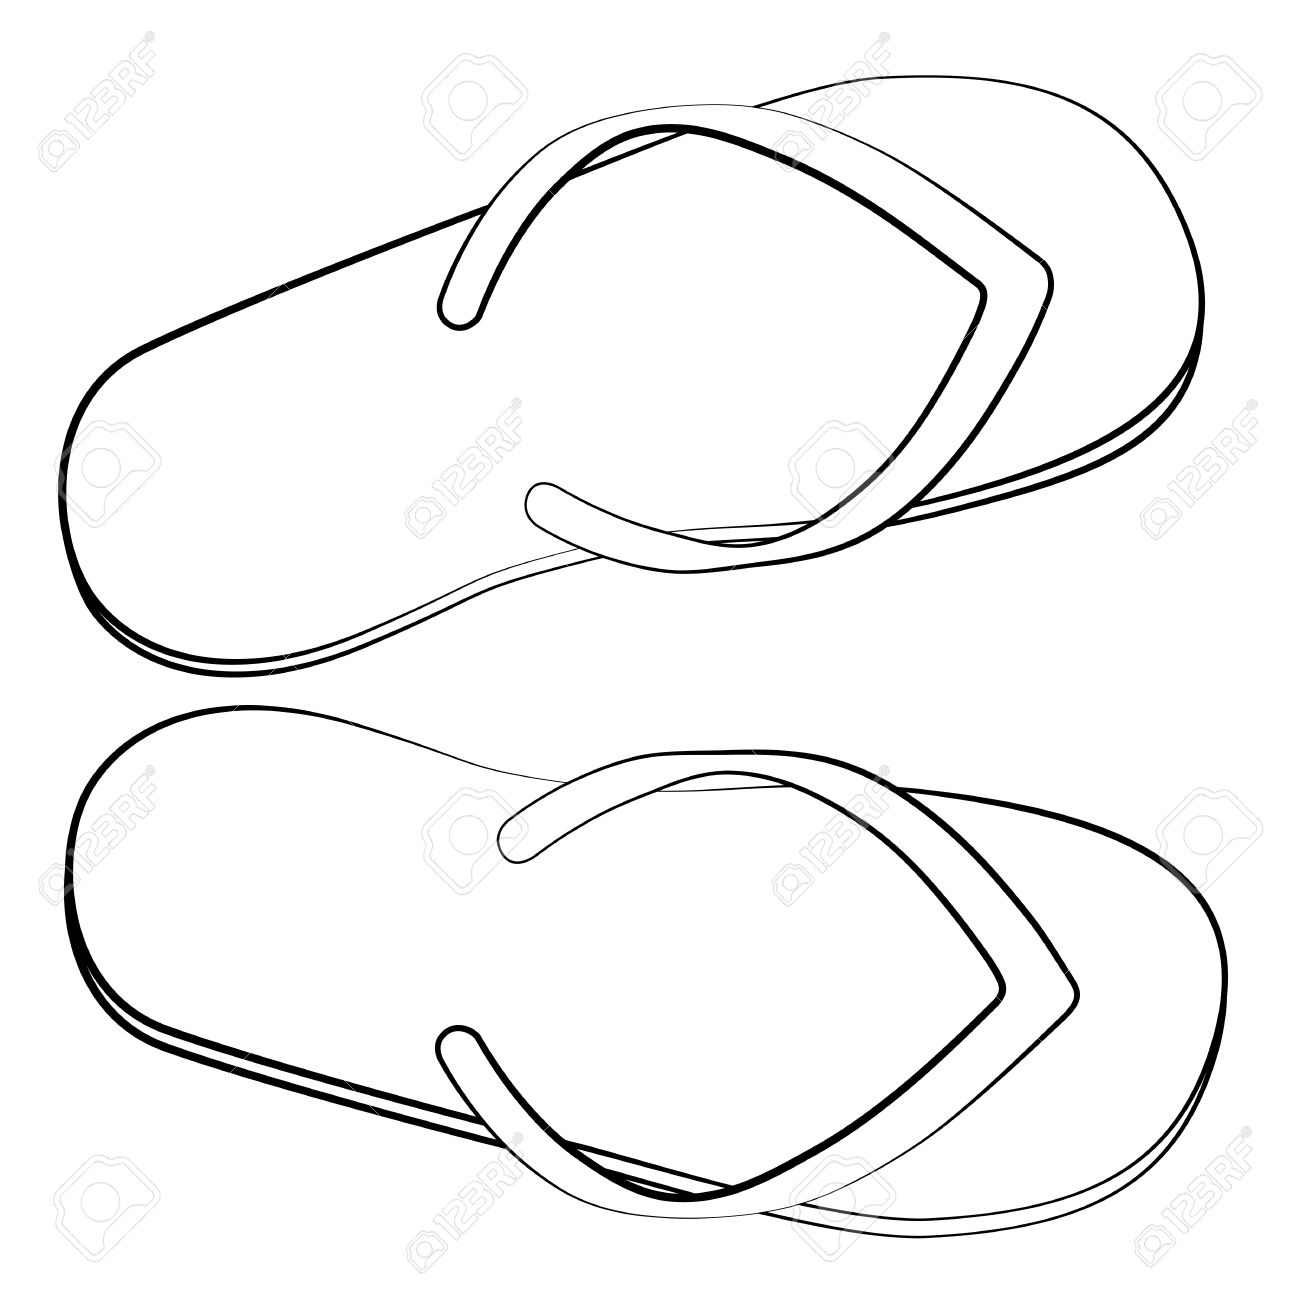 The best free Slippers drawing images. Download from 123 free drawings